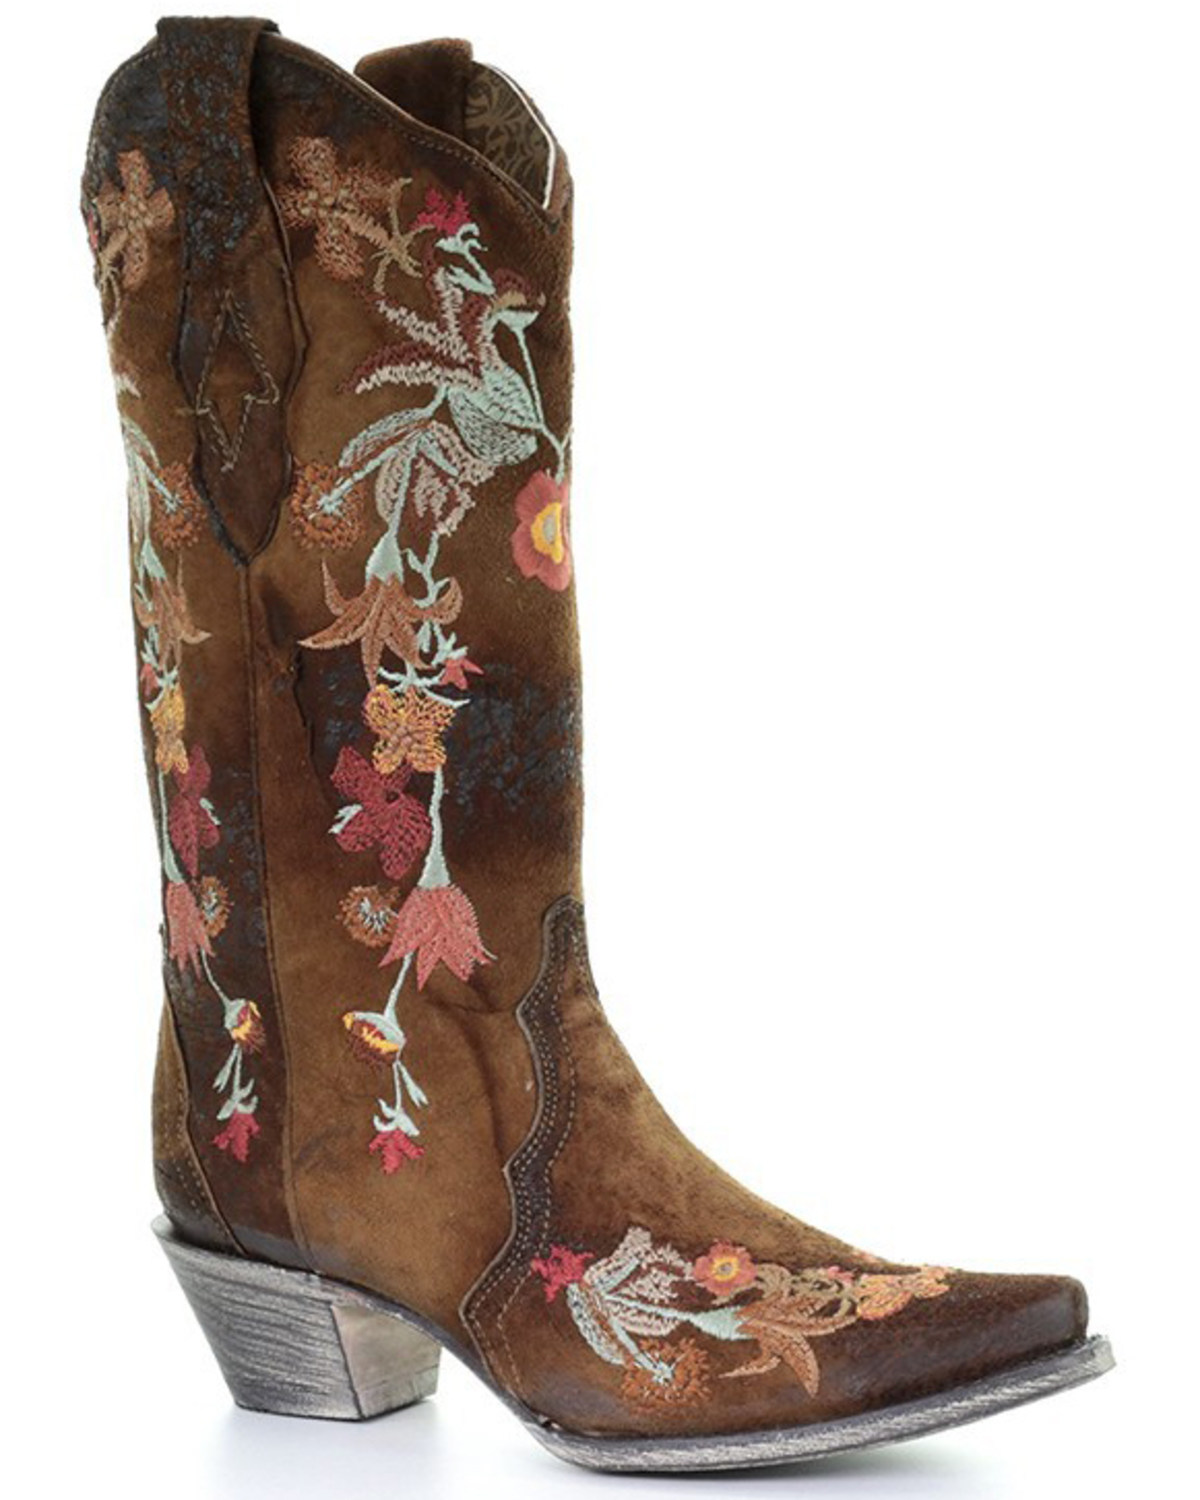 Corral Women's Floral Embroidered Western Boots - Snip Toe